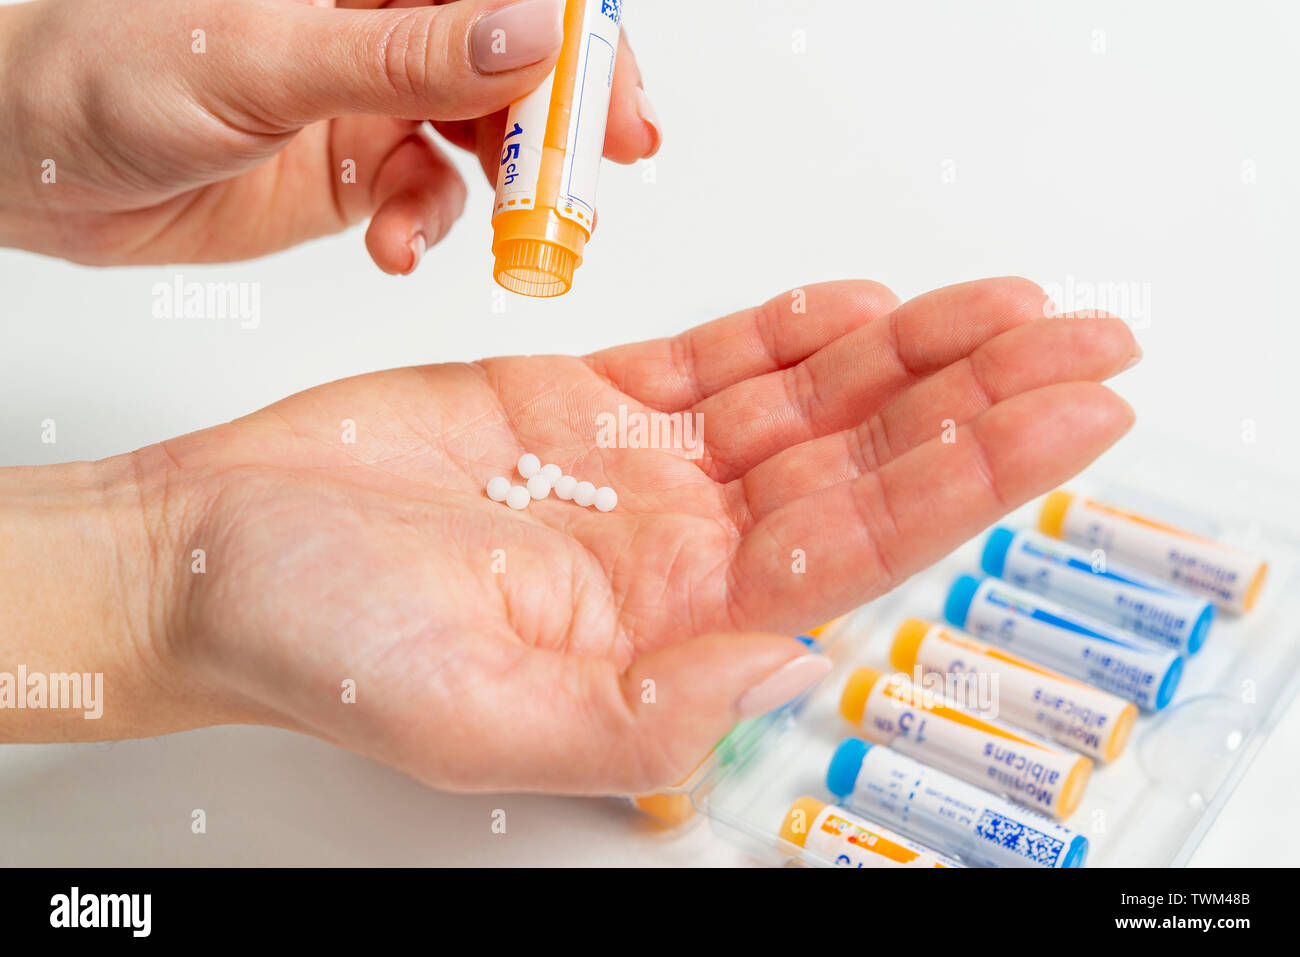 Homeopathic tubes: homeopathic granules, tubes from the Boiron laboratories. Woman putting homeopathic granules in her hand Stock Photo